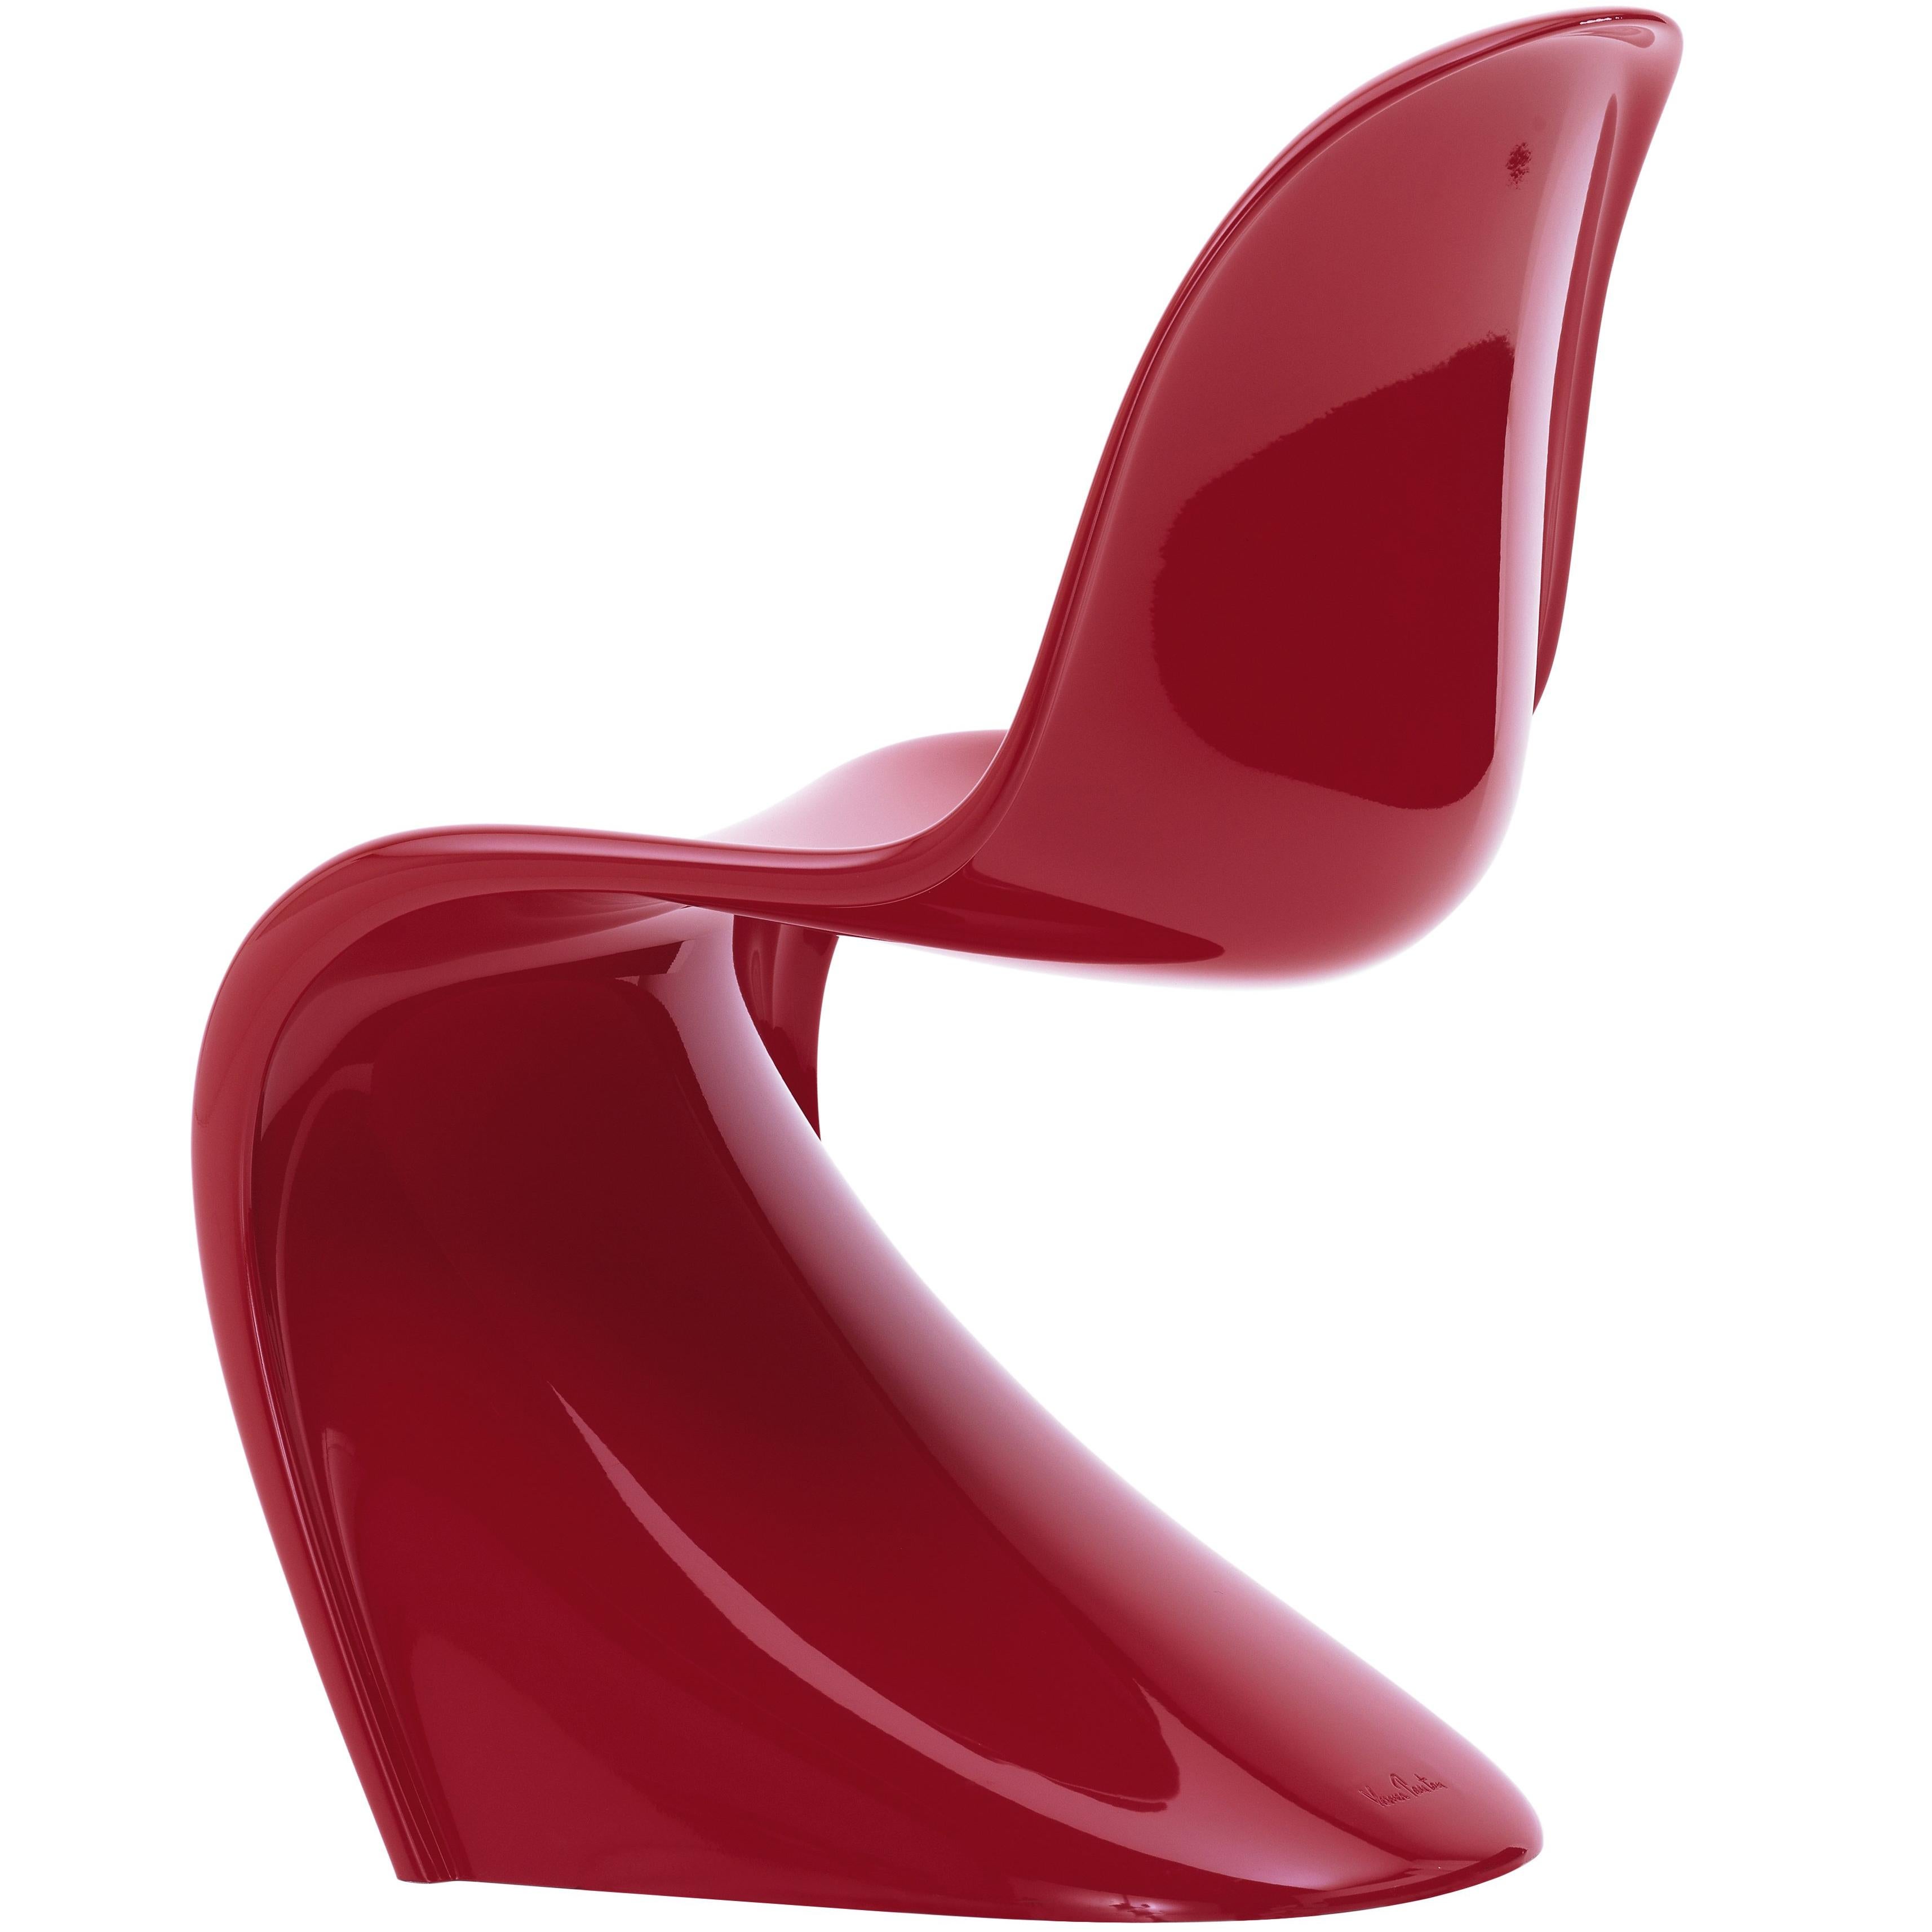 Vitra Classic Panton Chair in Lacquered Red by Verner Panton For Sale